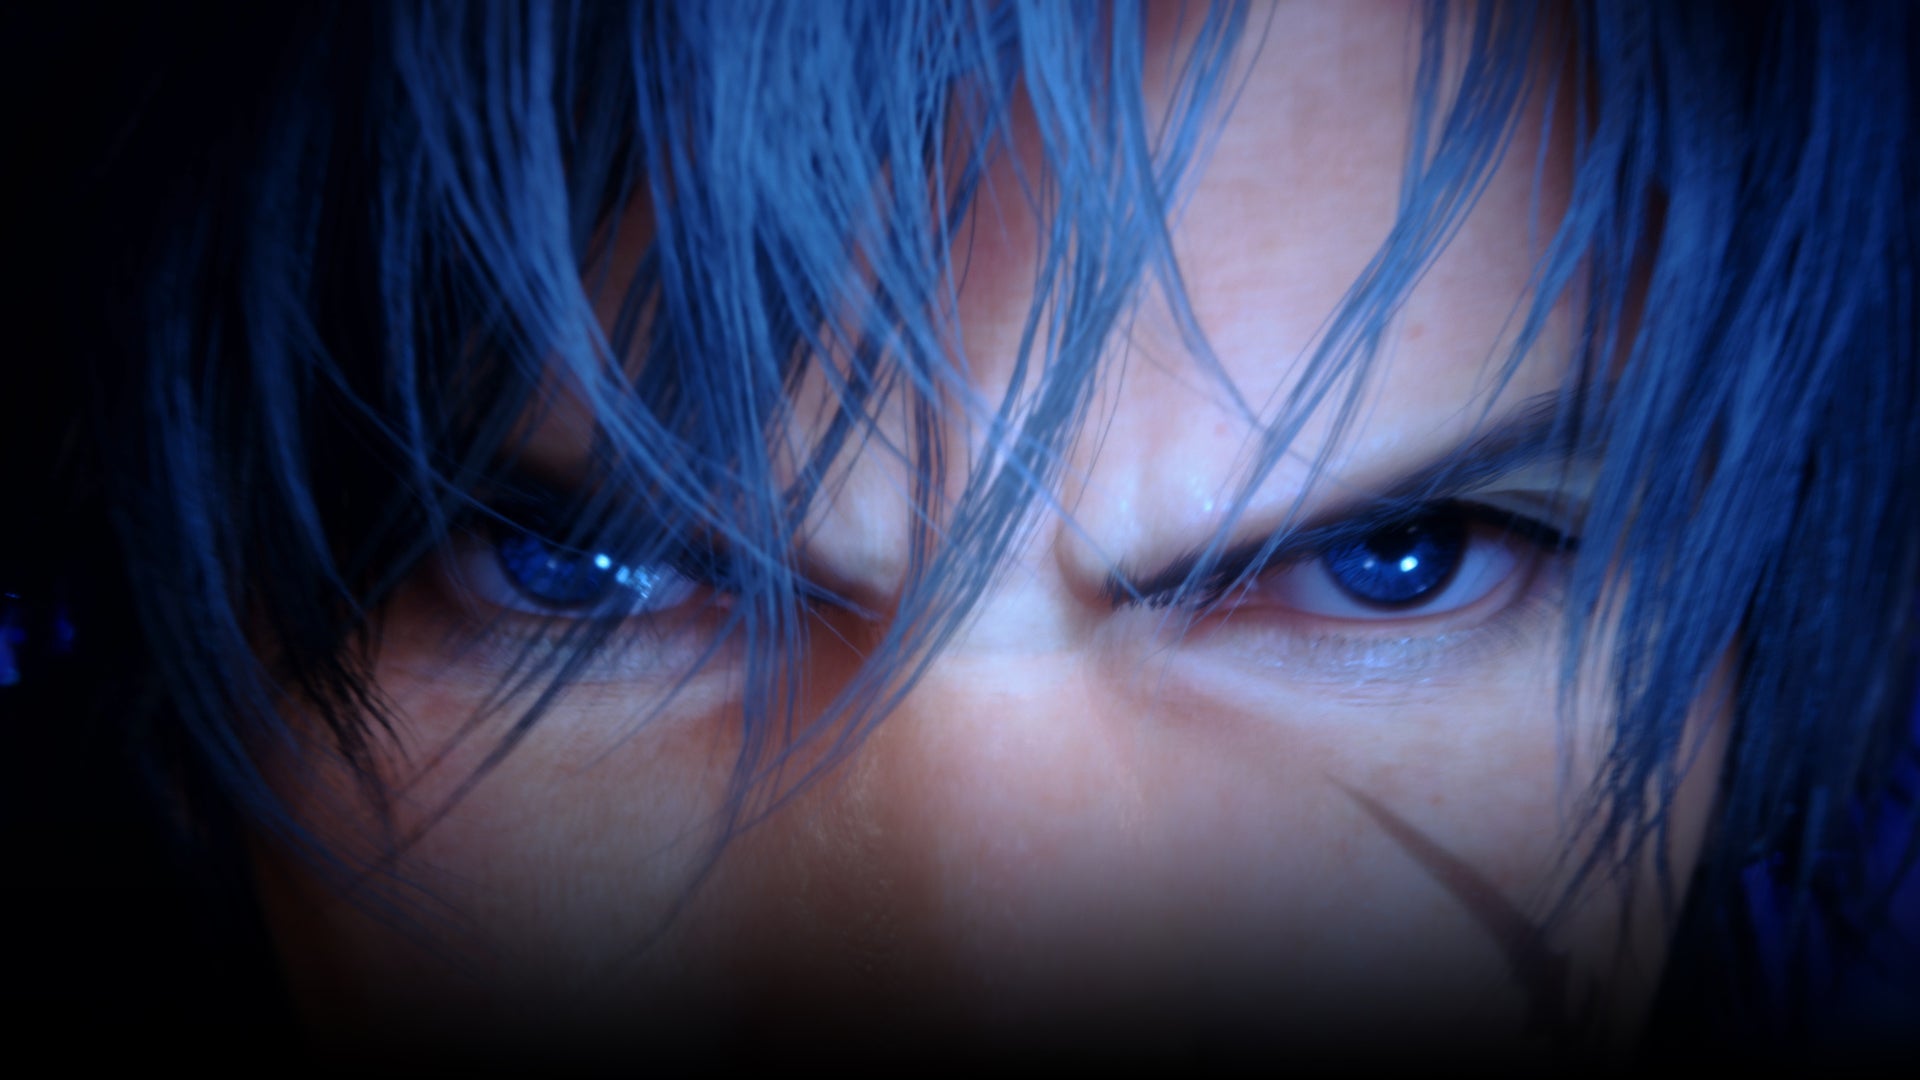 A close-up shot on the eyes of Clive, a character from Final Fantasy XVI.